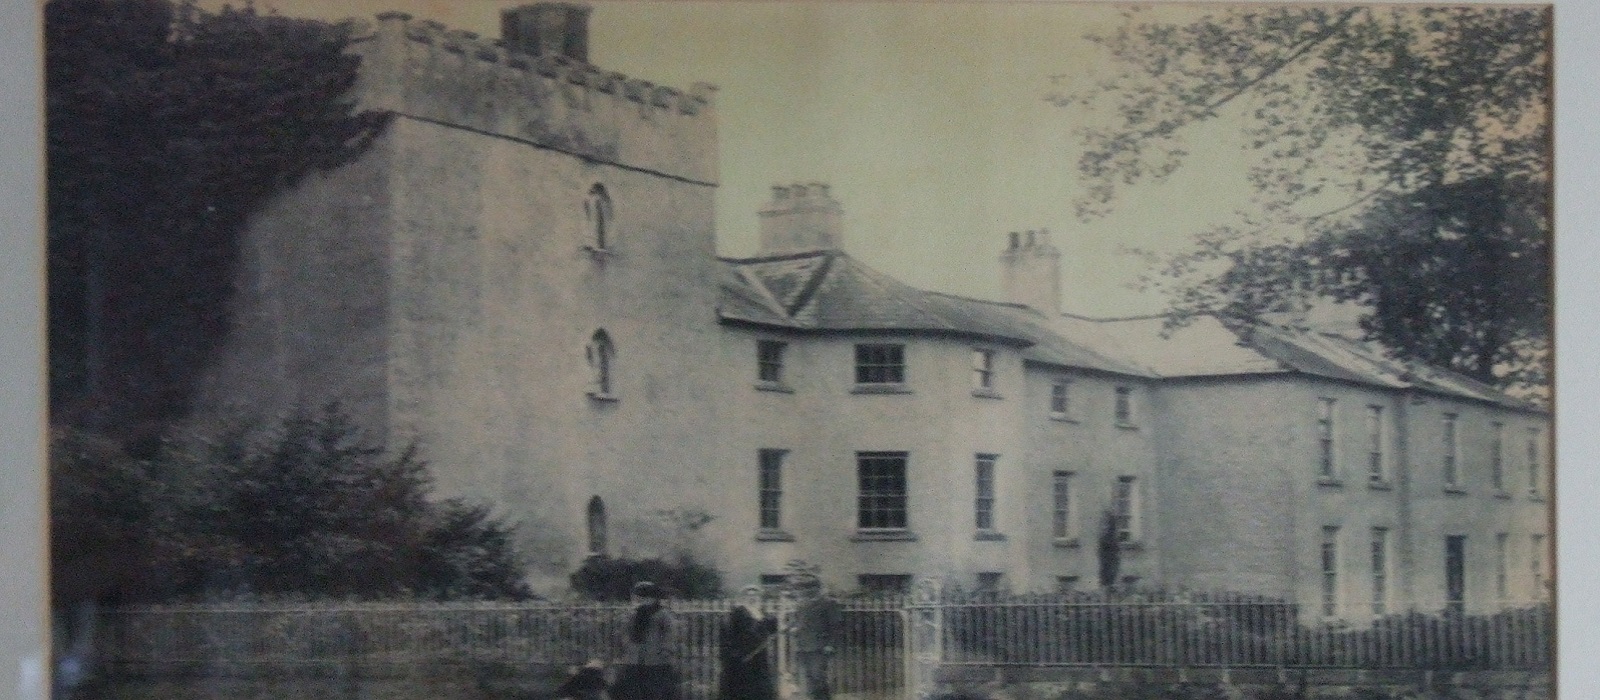 Barberstown Castle Historic Photo